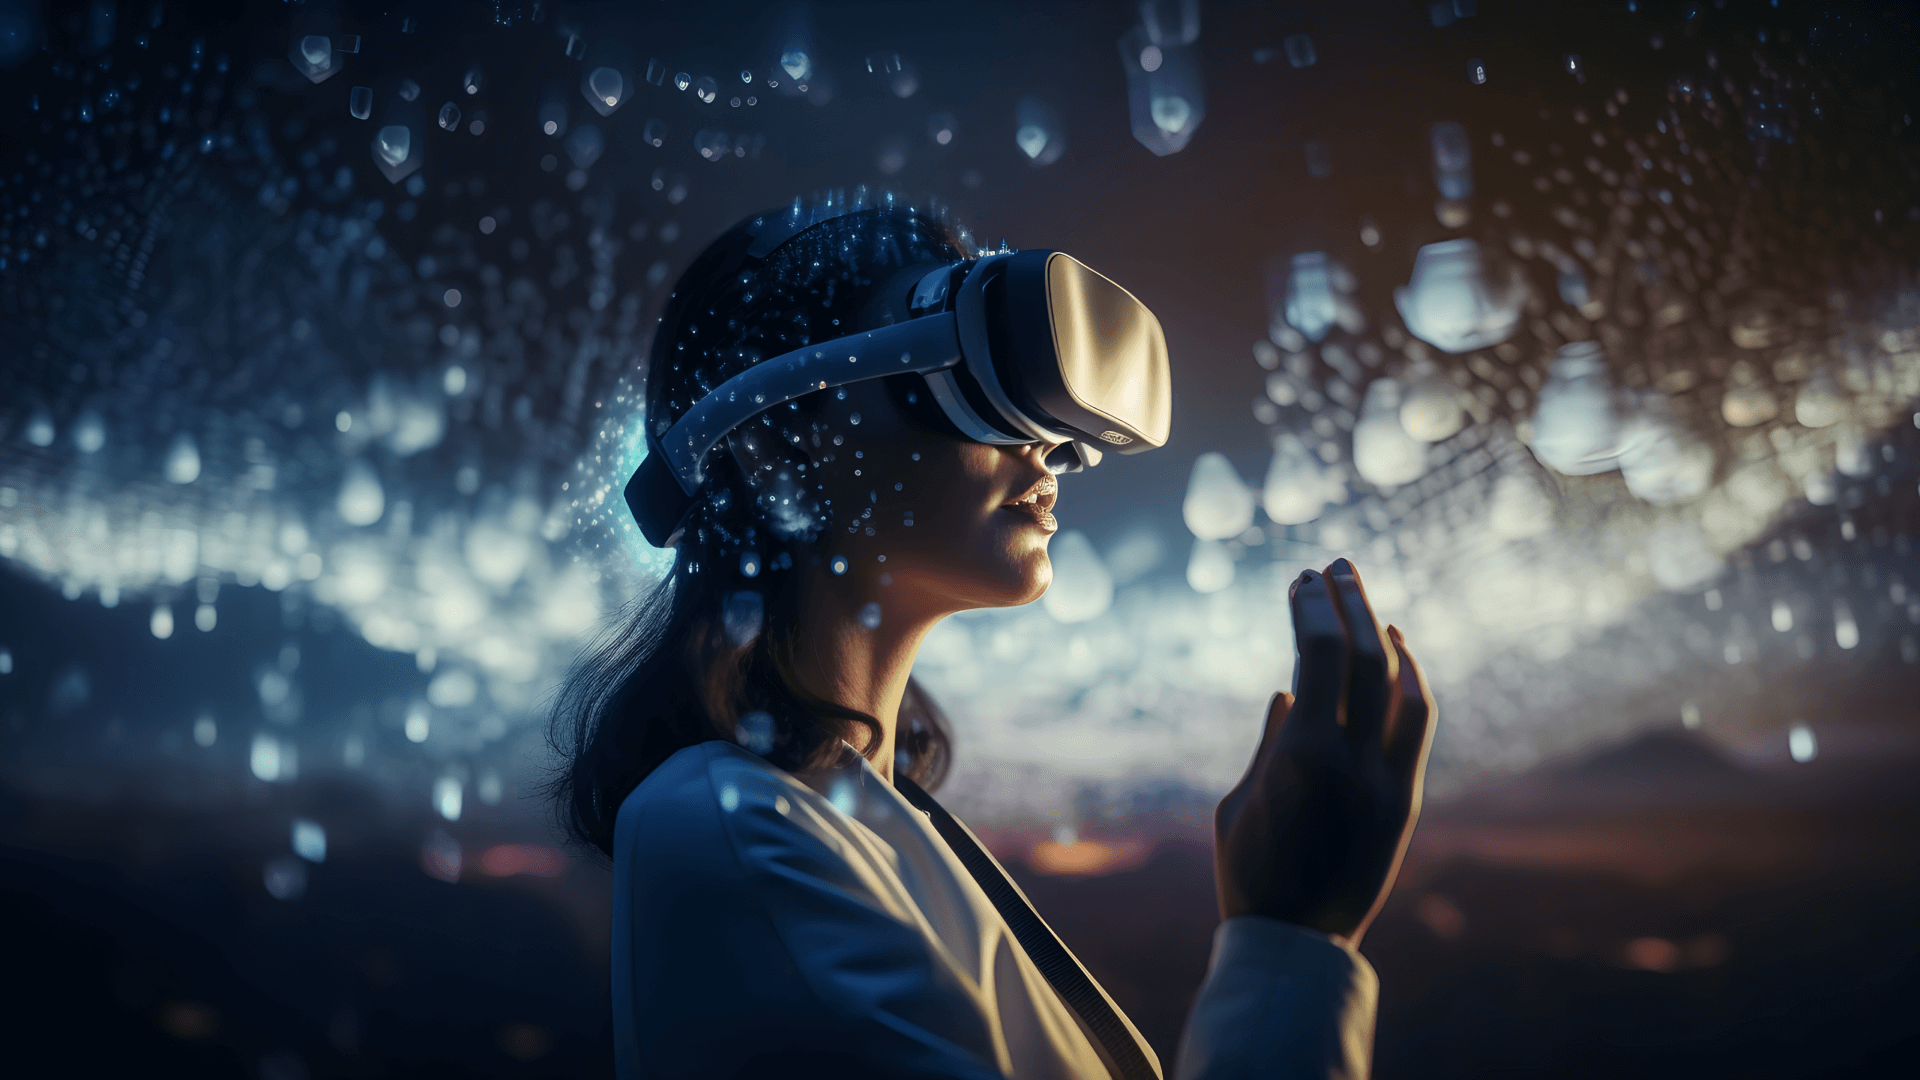 Metaverse Trends: What's Next for Virtual Reality?